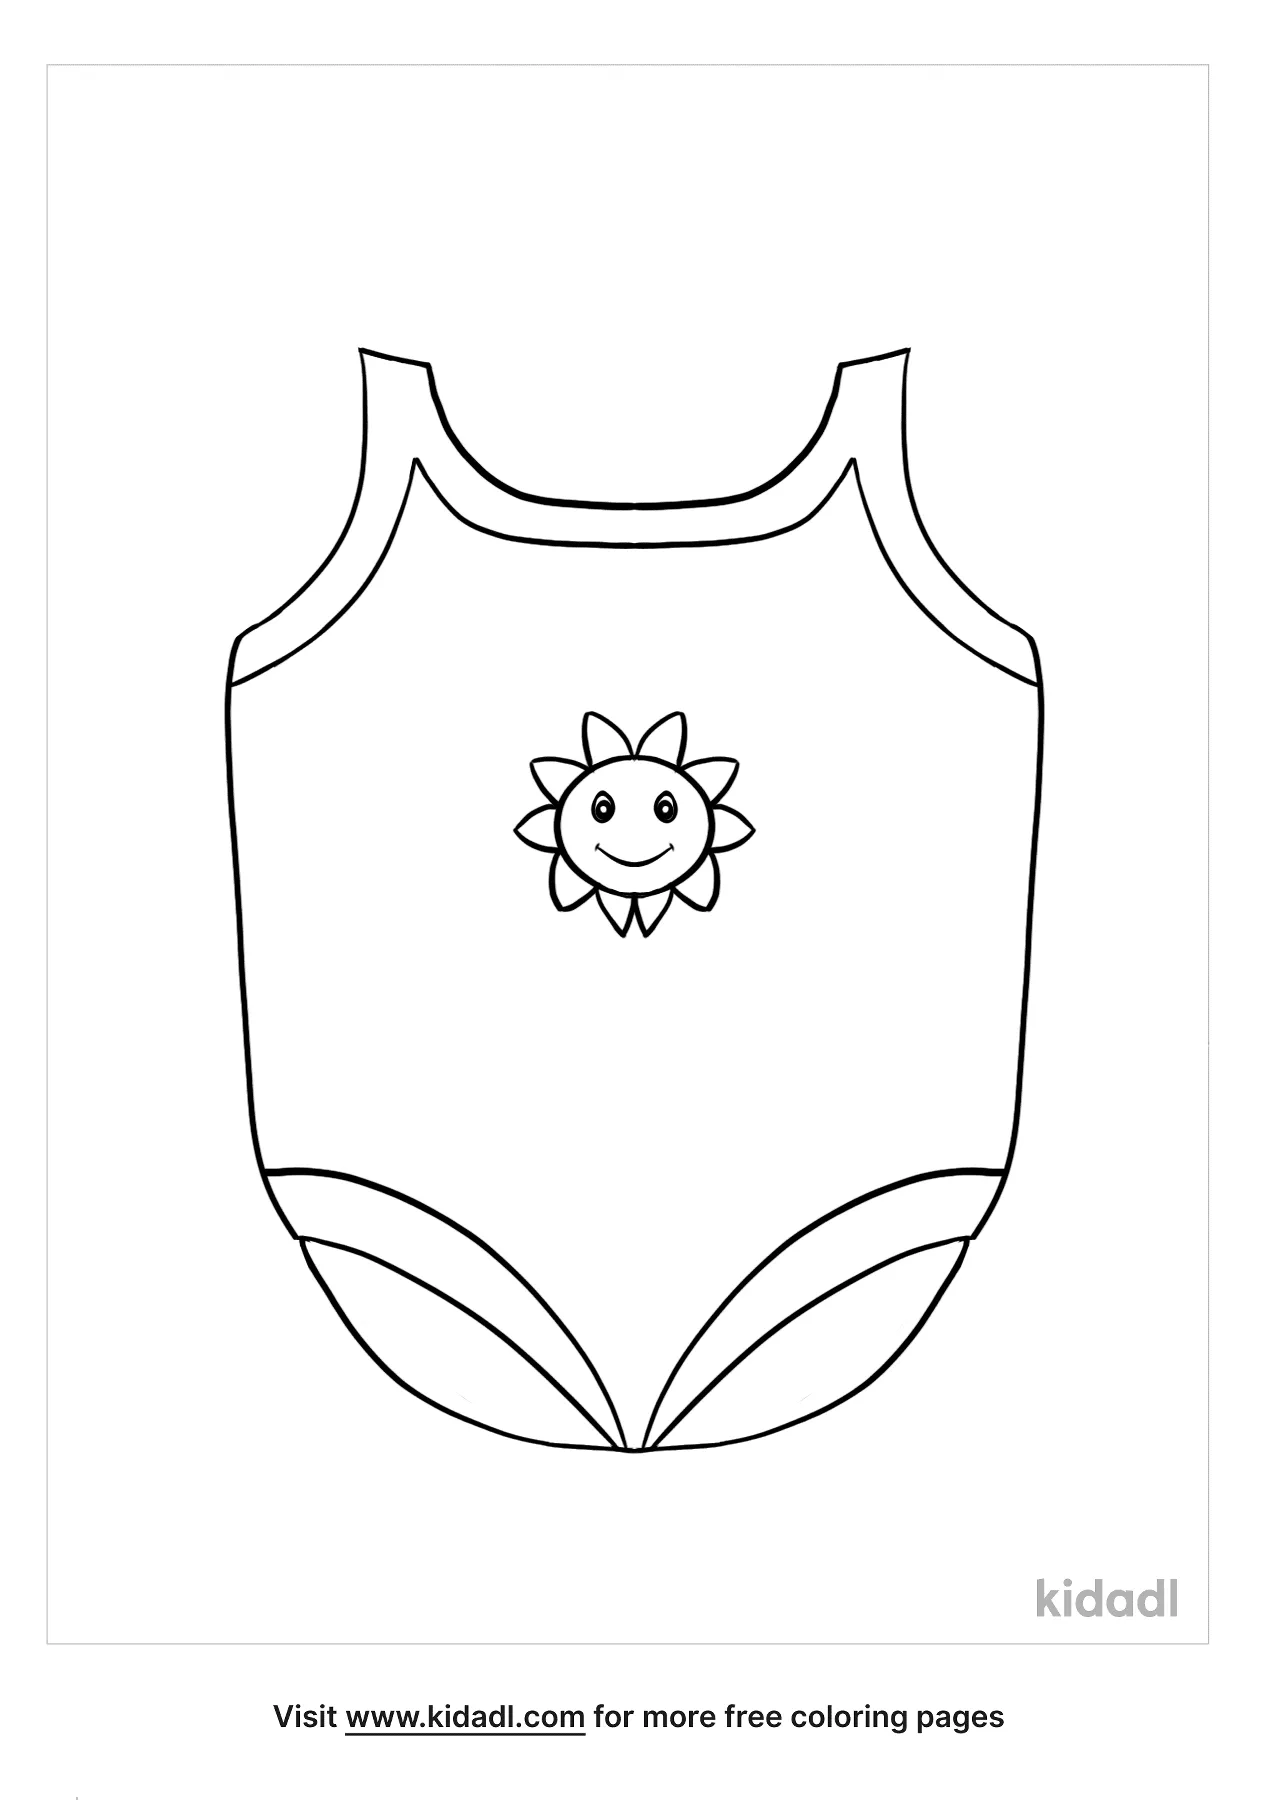 Onesie Coloring Pages Free Fashion Beauty Coloring Pages Kidadl